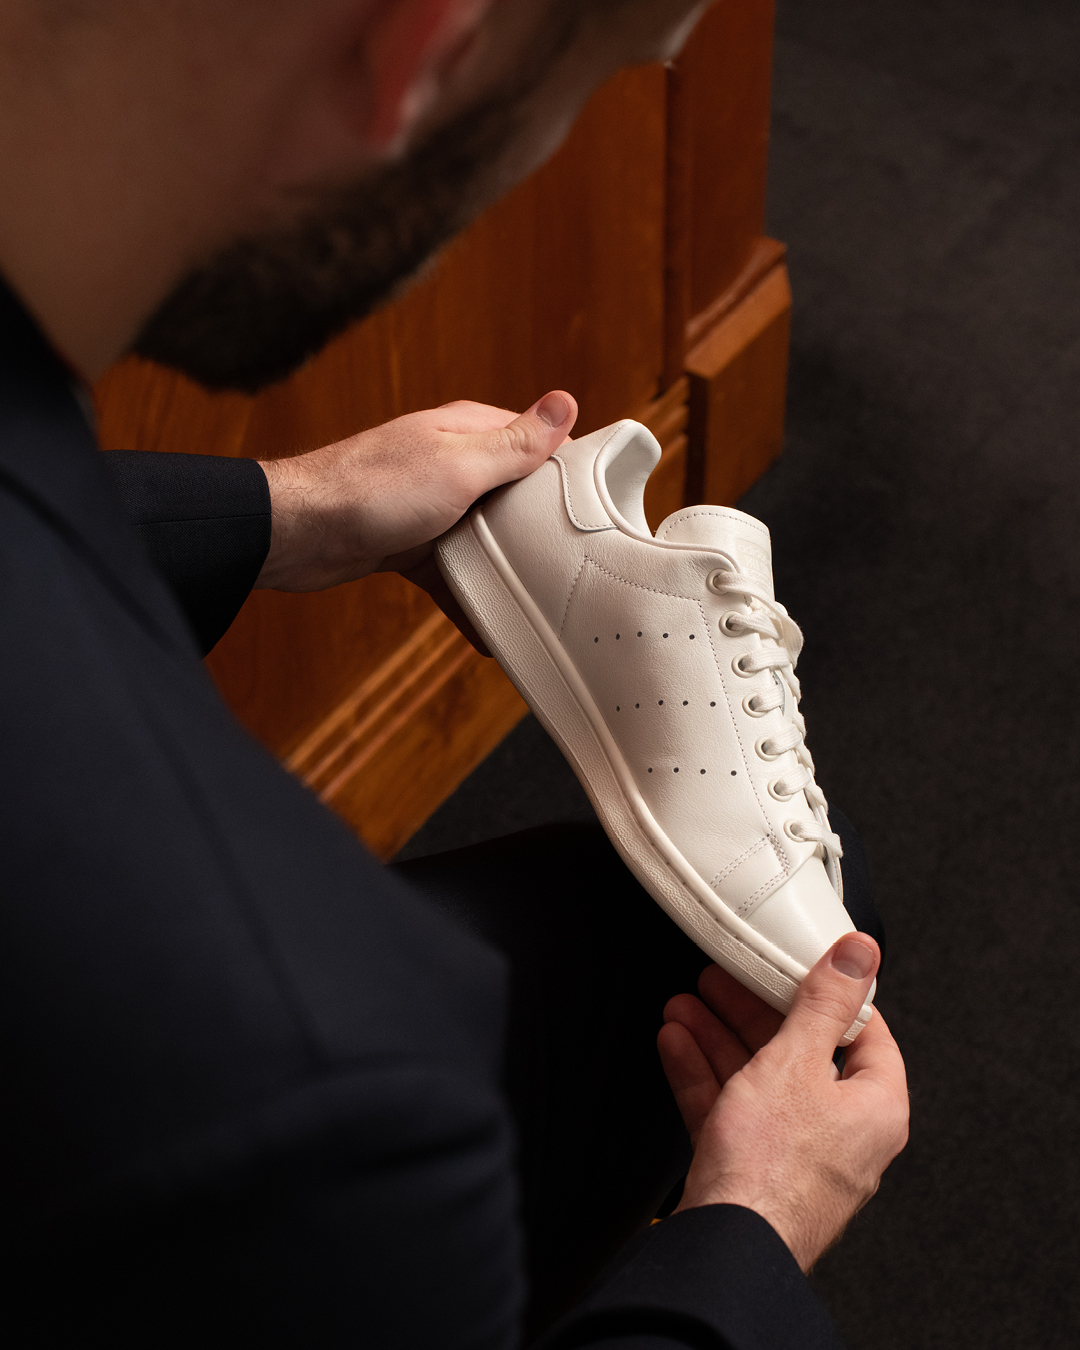 paul smith stan smith manchester united